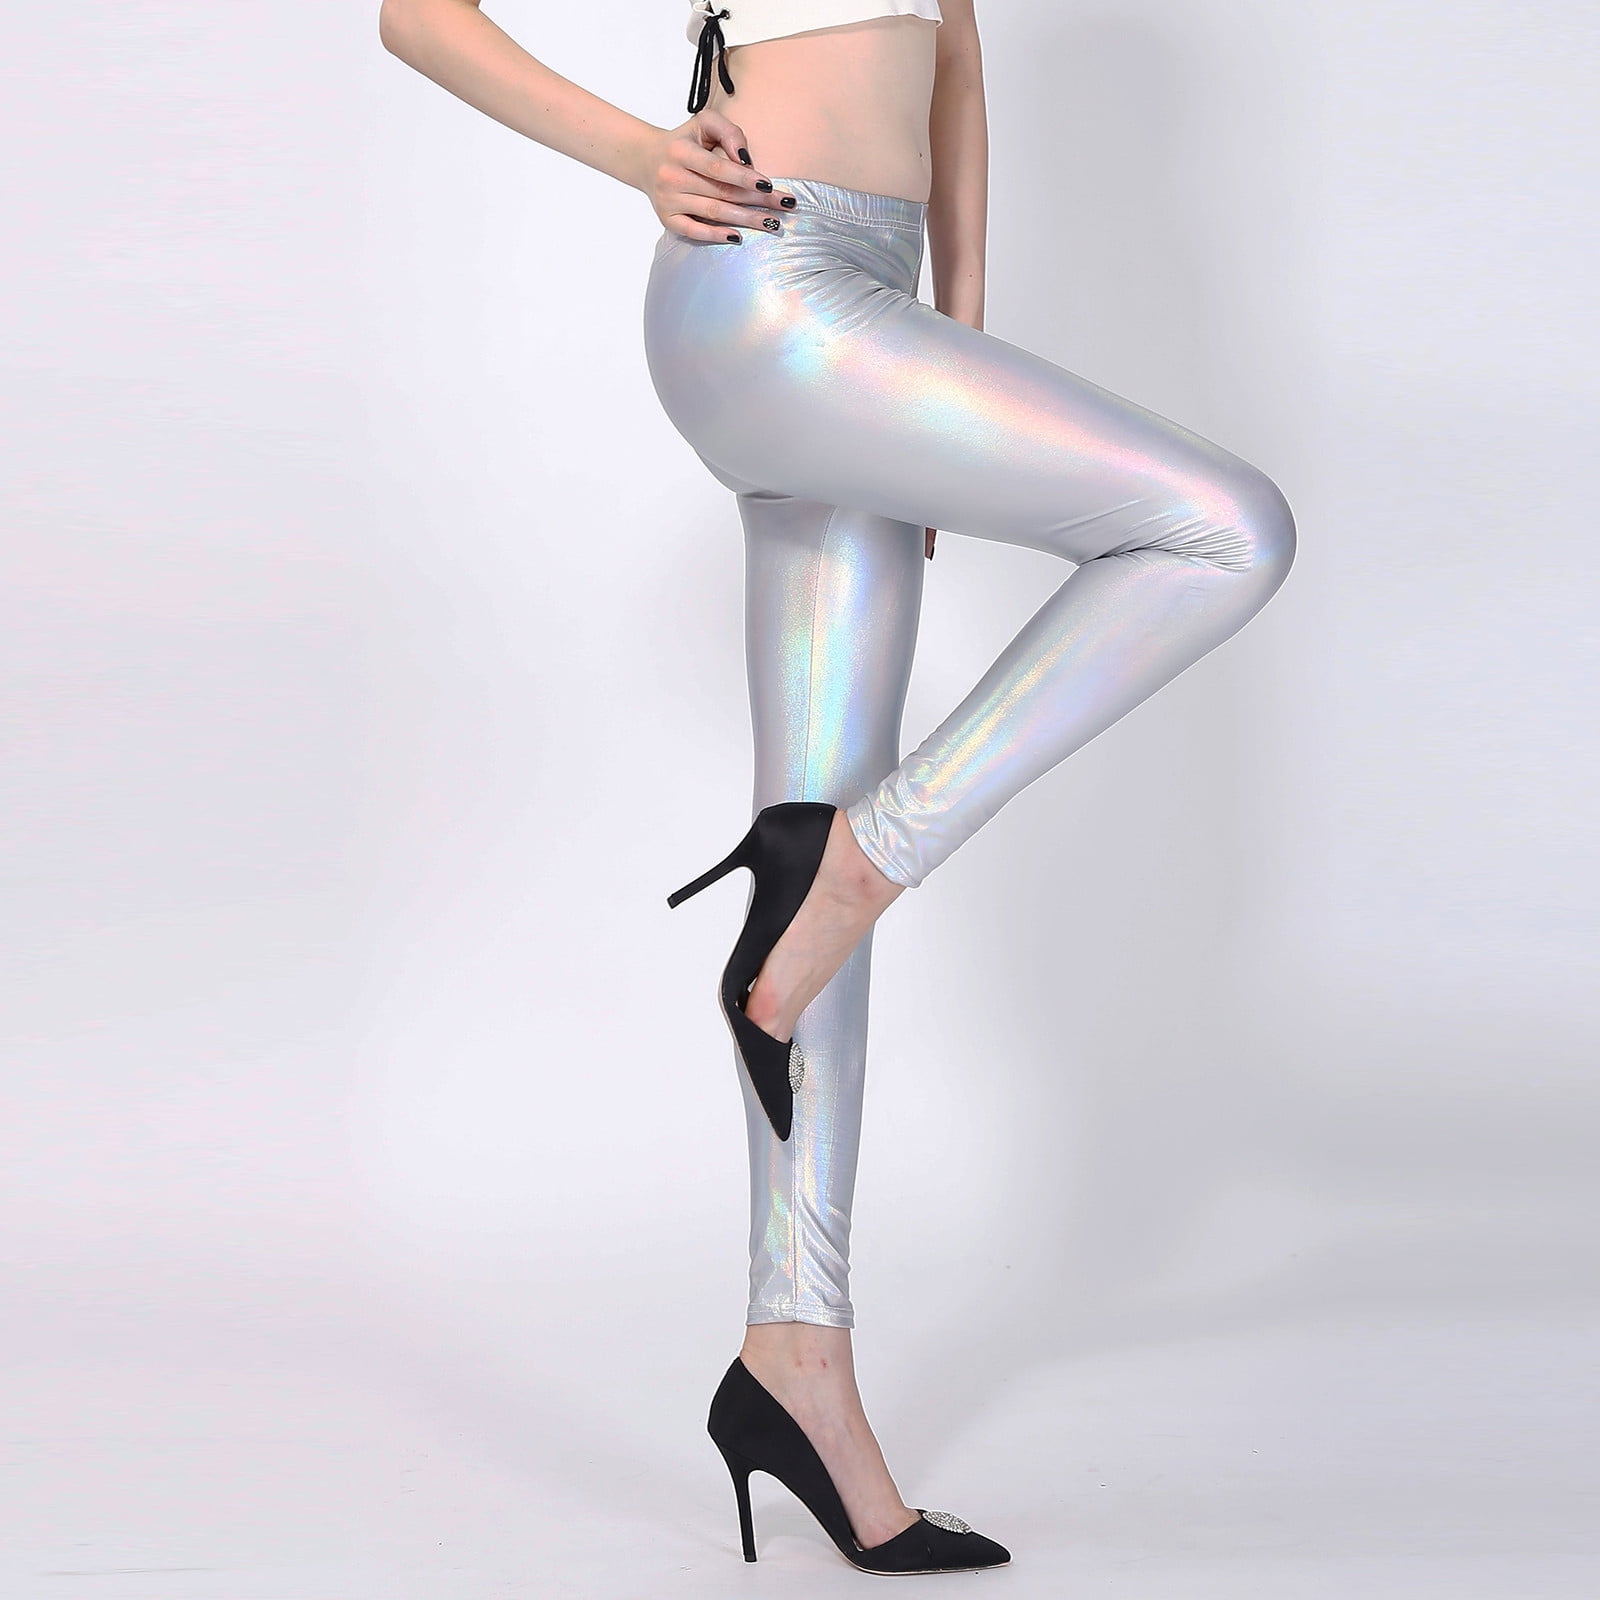 YYDGH Women's Shiny Metallic Leggings Sexy High Gloss Skinny Pants Faux  Leather Stretch Shaping Tights Trousers Blue L 